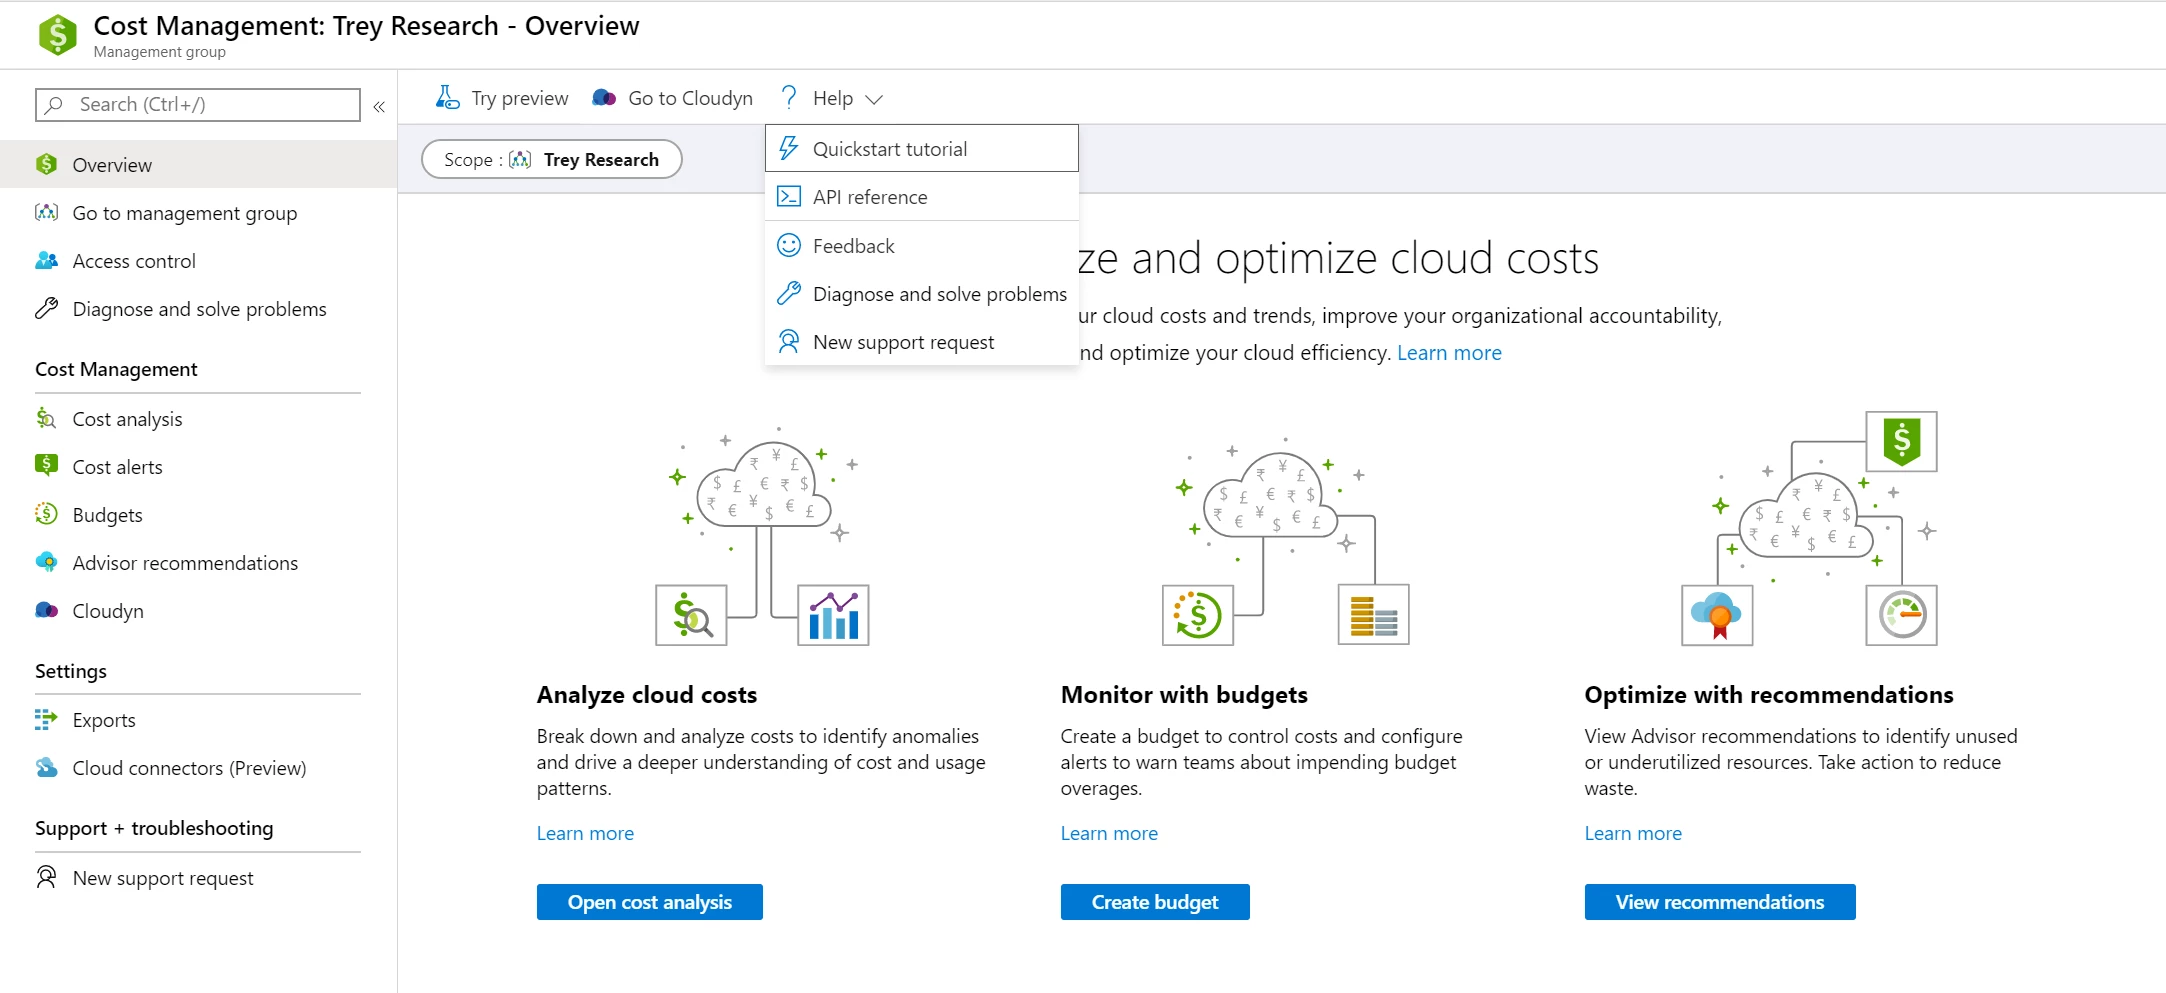 Help menu in Azure Cost Management showing options to navigate to a Quickstart tutorial, API reference, Feedback, Diagnose and solve problems, and New support request